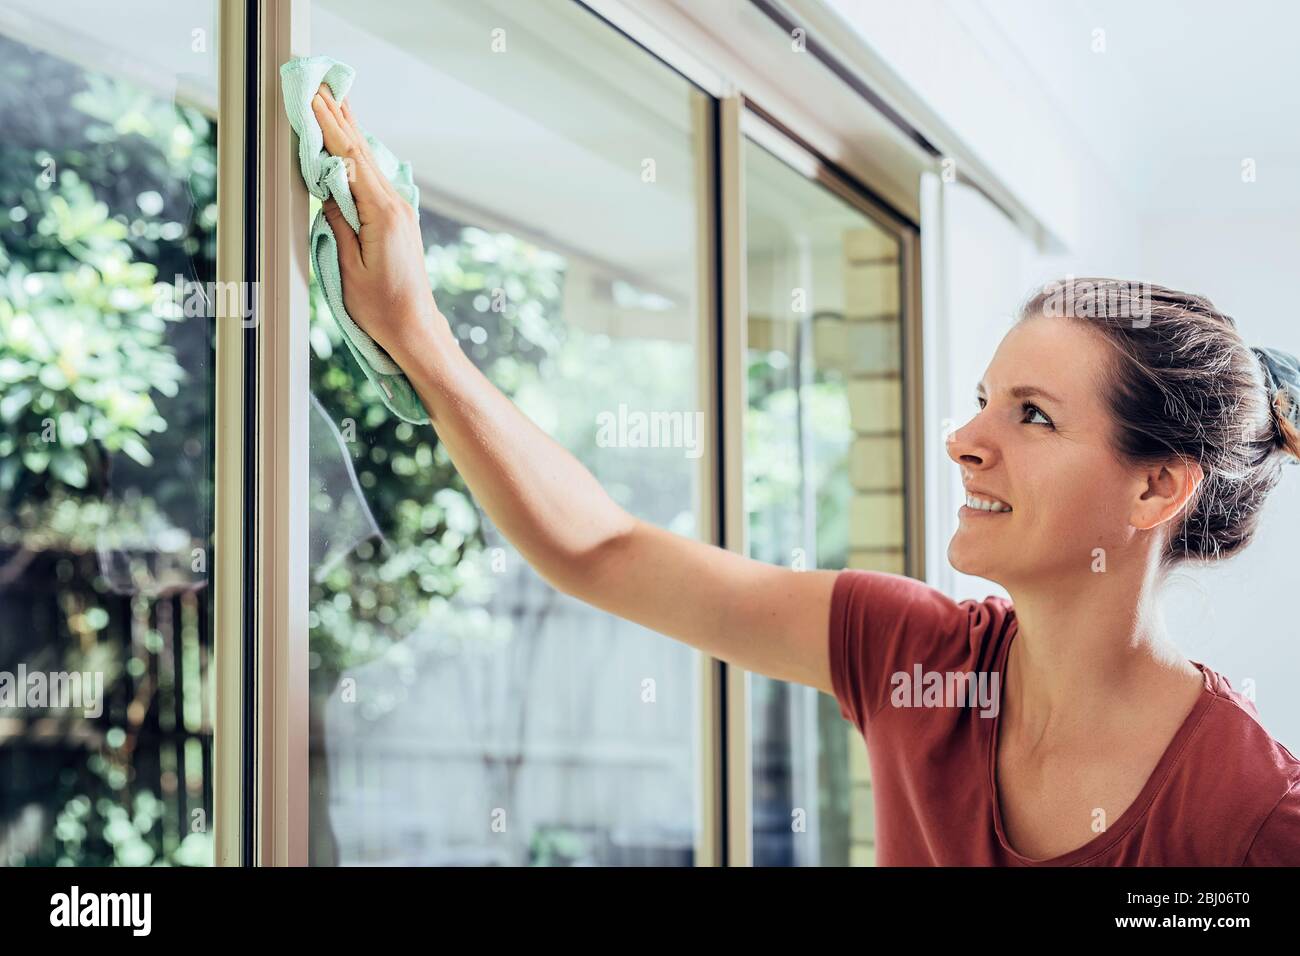 Young smiling woman is cleaning windows in a house, doing chores. Stock Photo